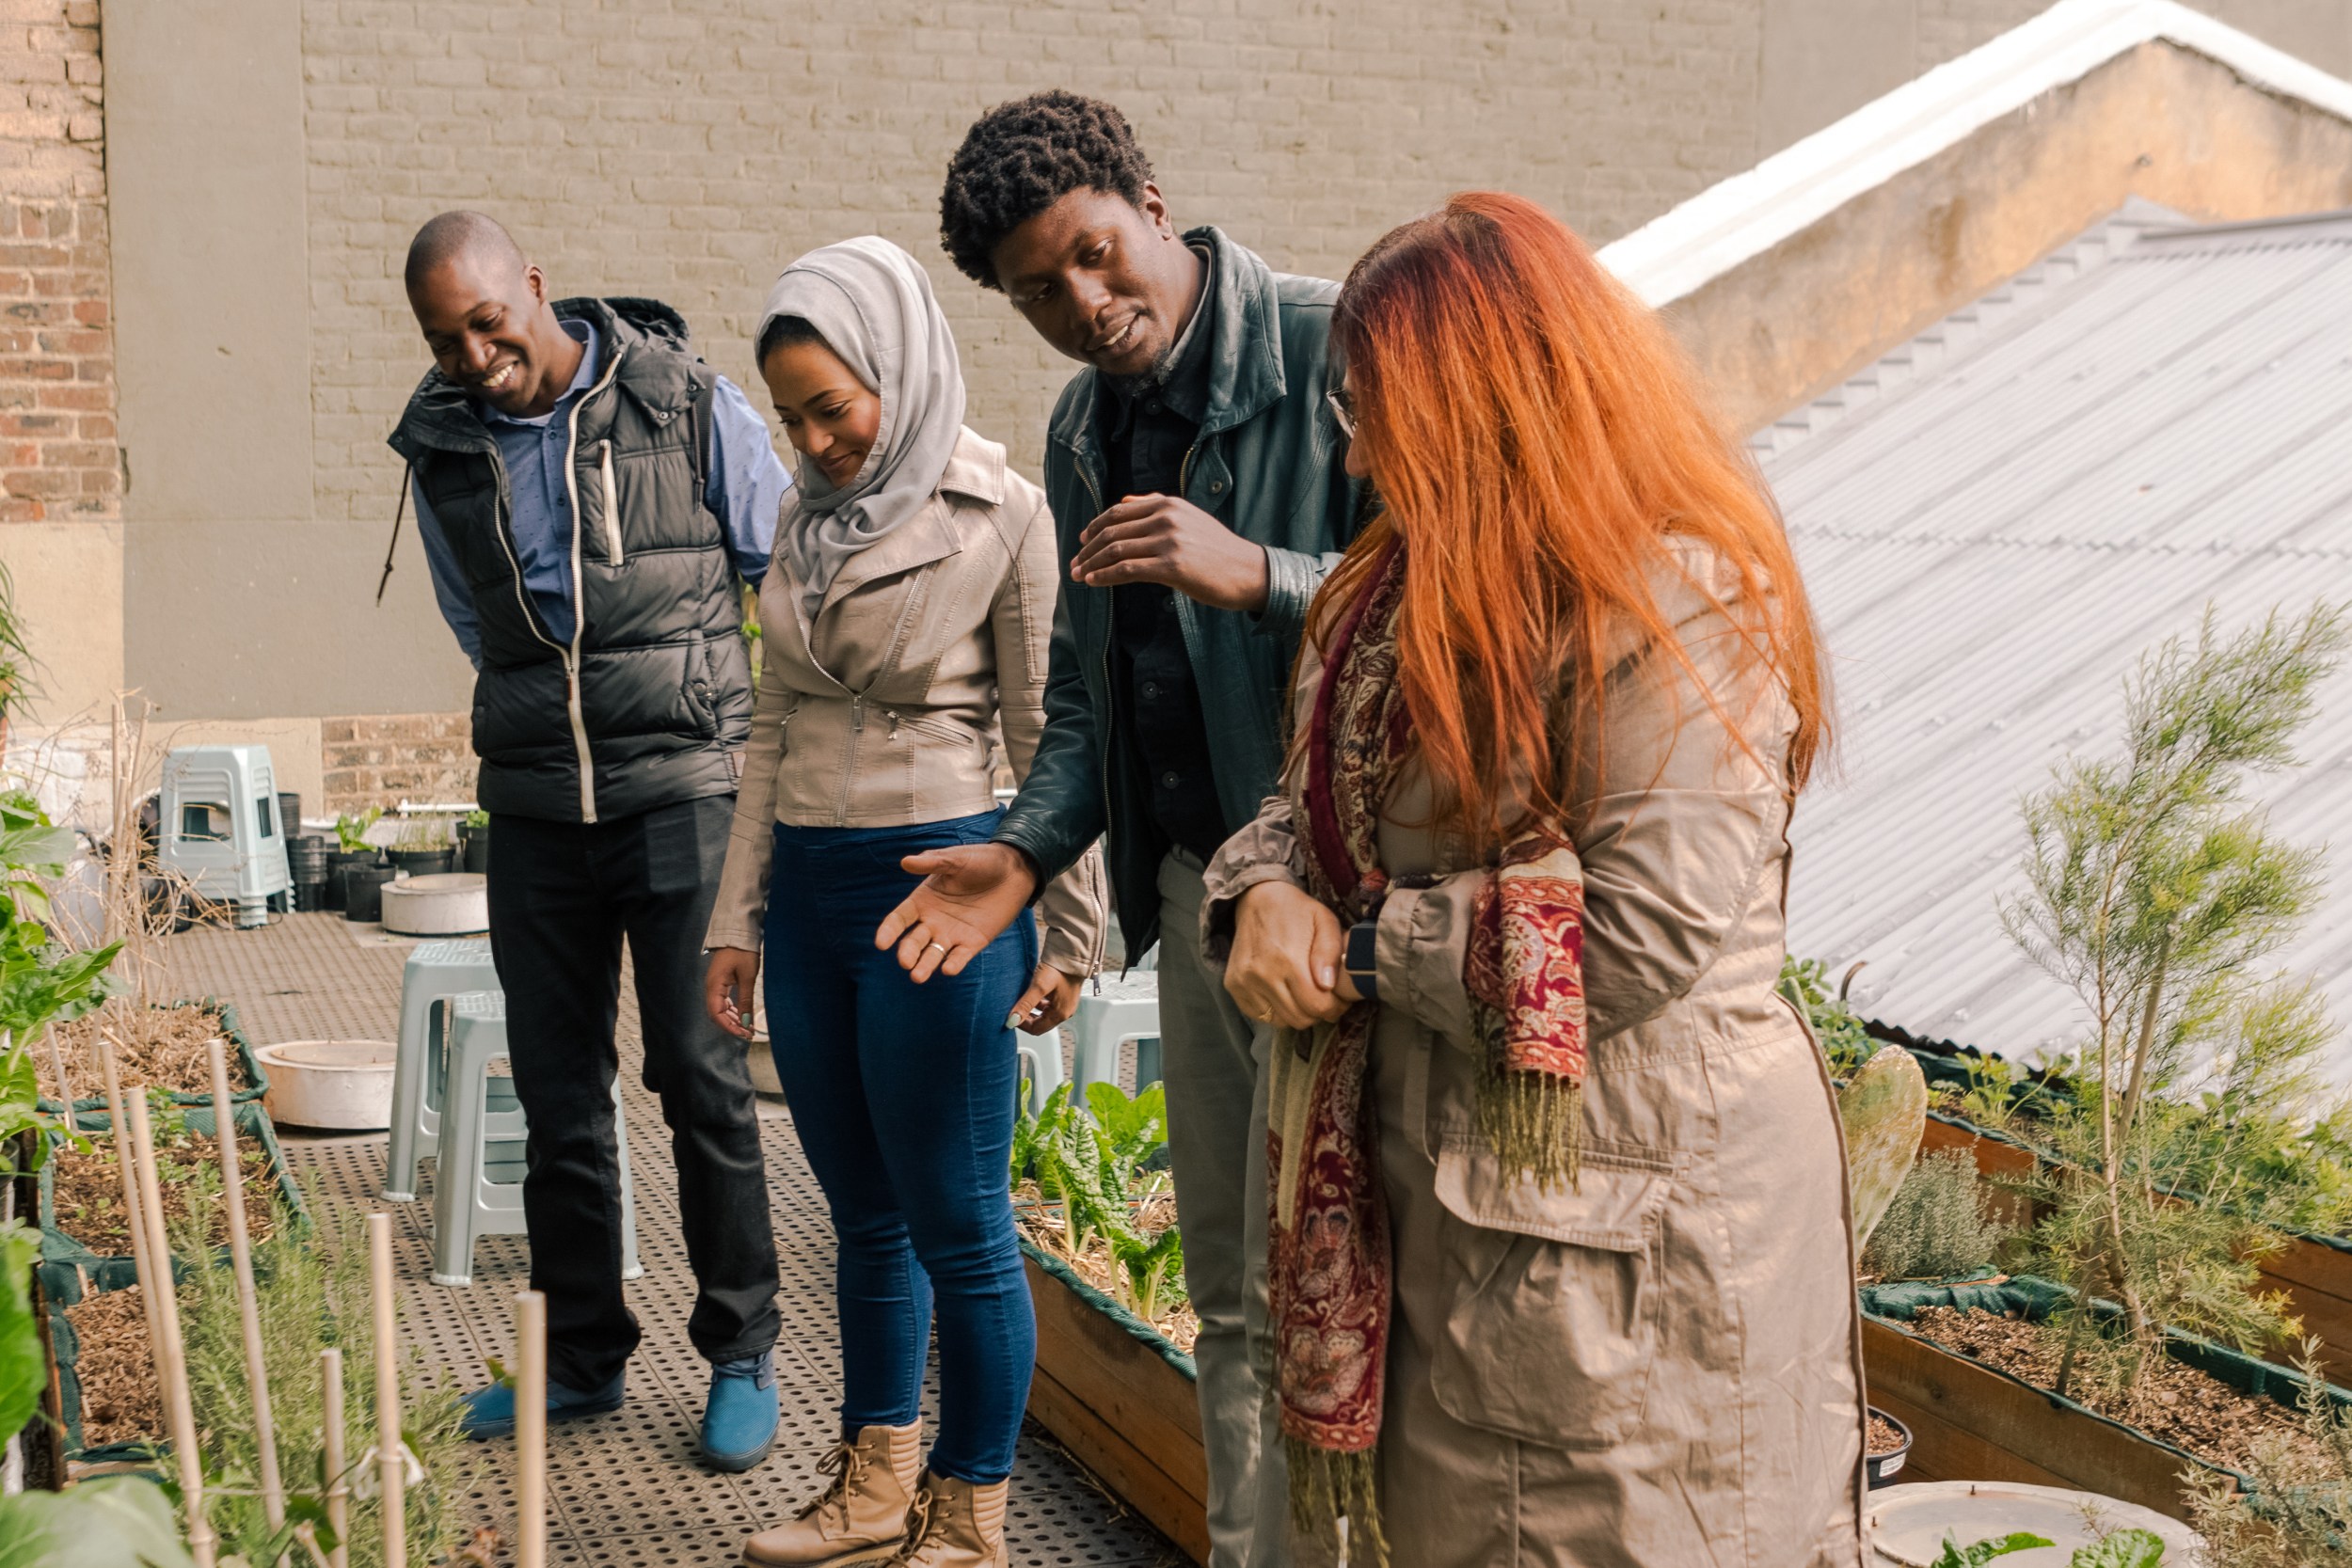 A diverse group of people talking while standing in front of a roof garden.